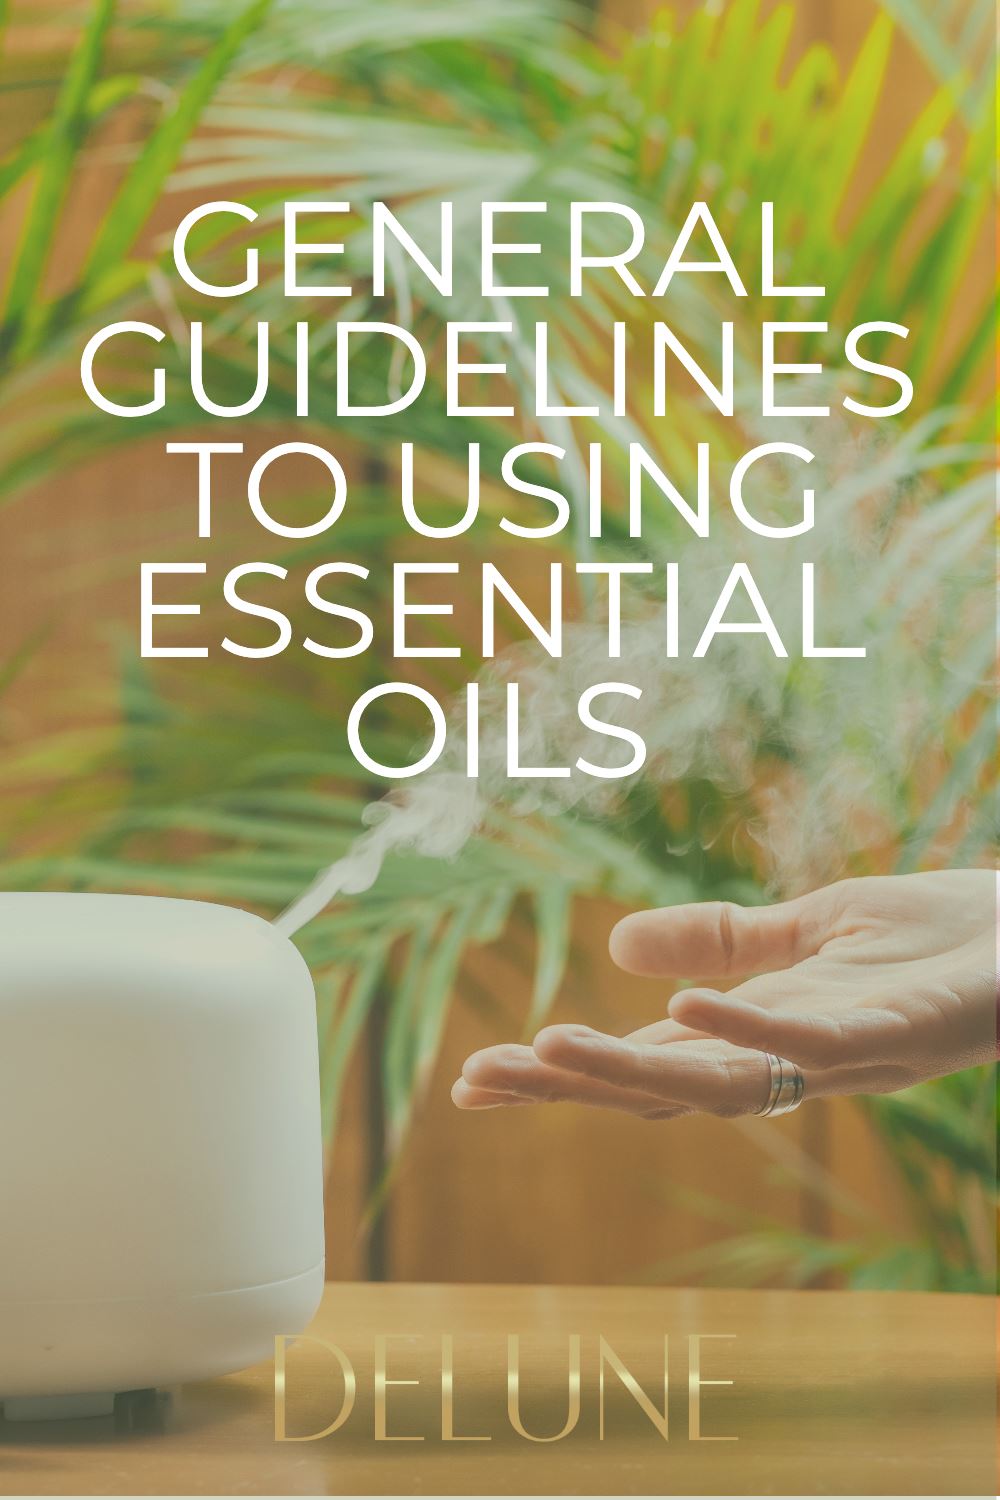 General Guidelines to Using Essential Oils